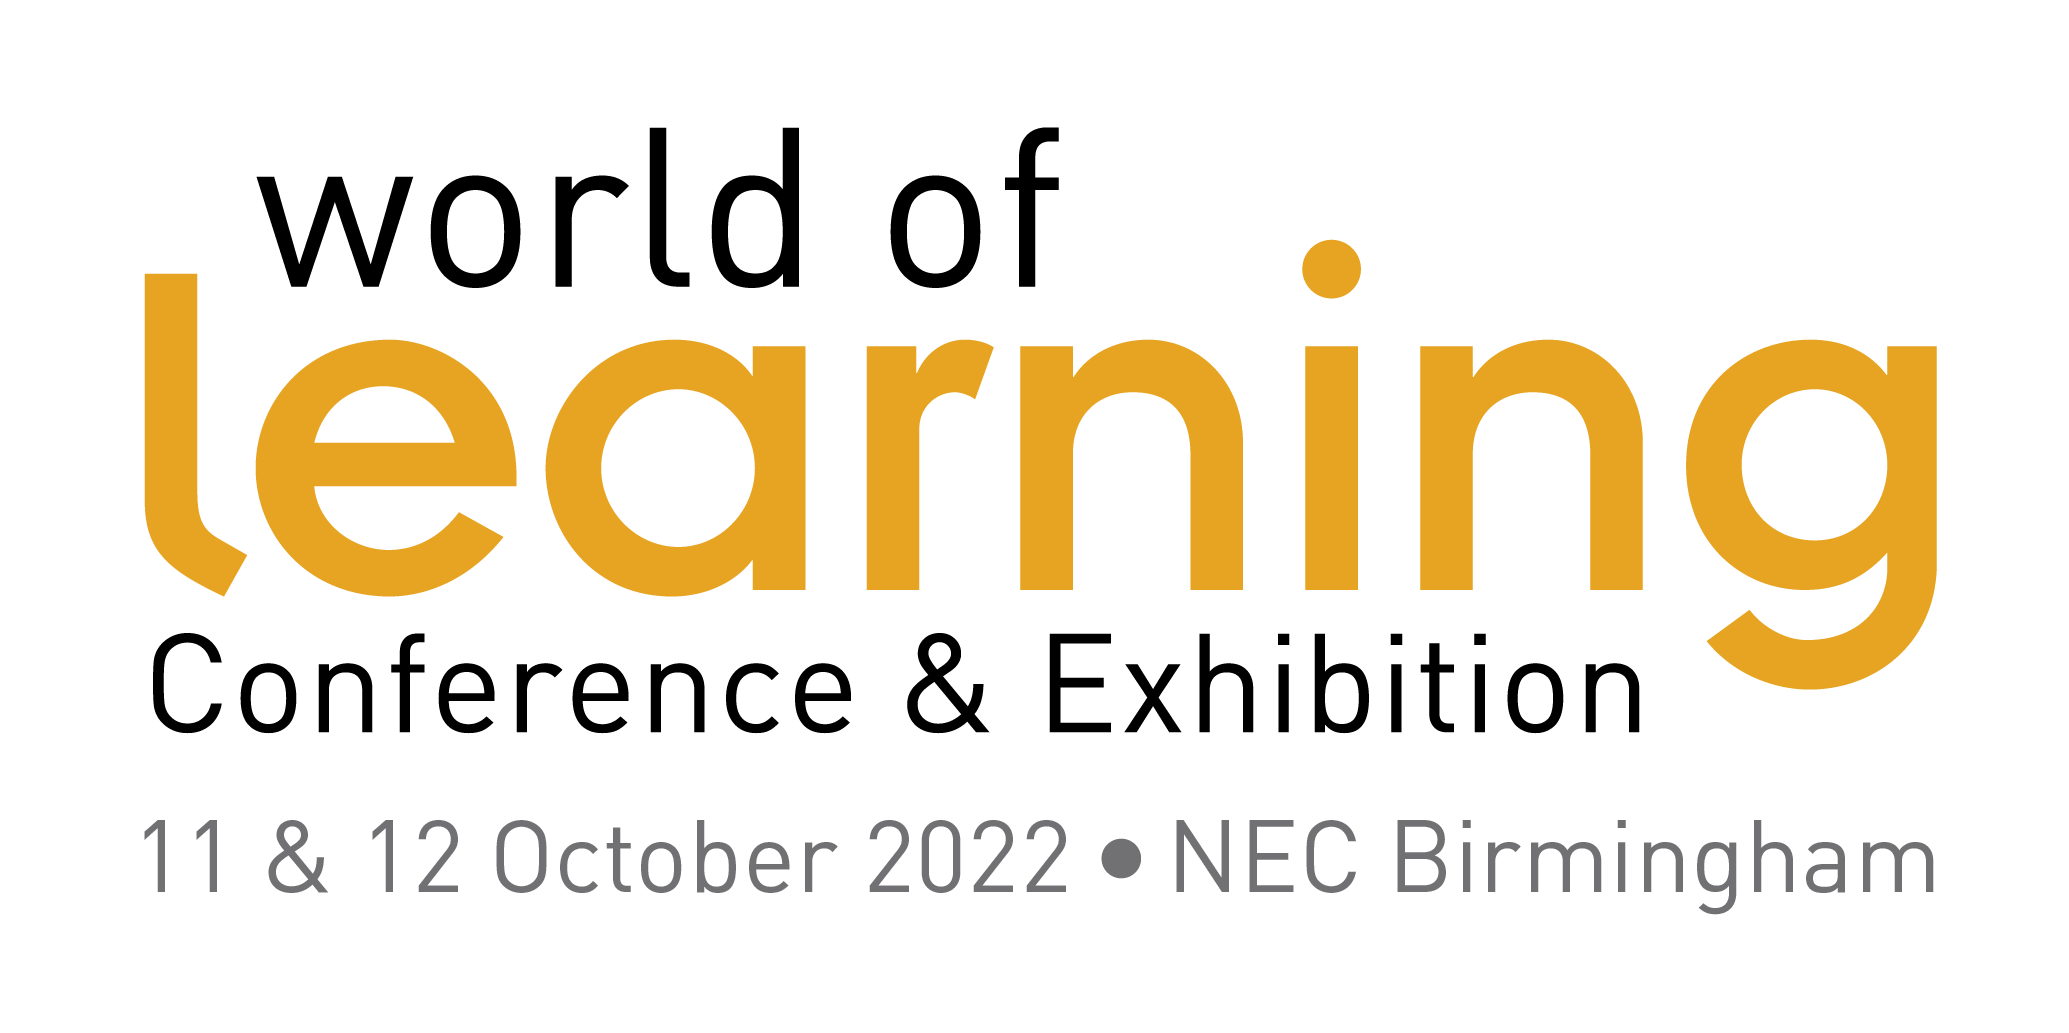 The World of Learning Conference & Exhibition returns this October